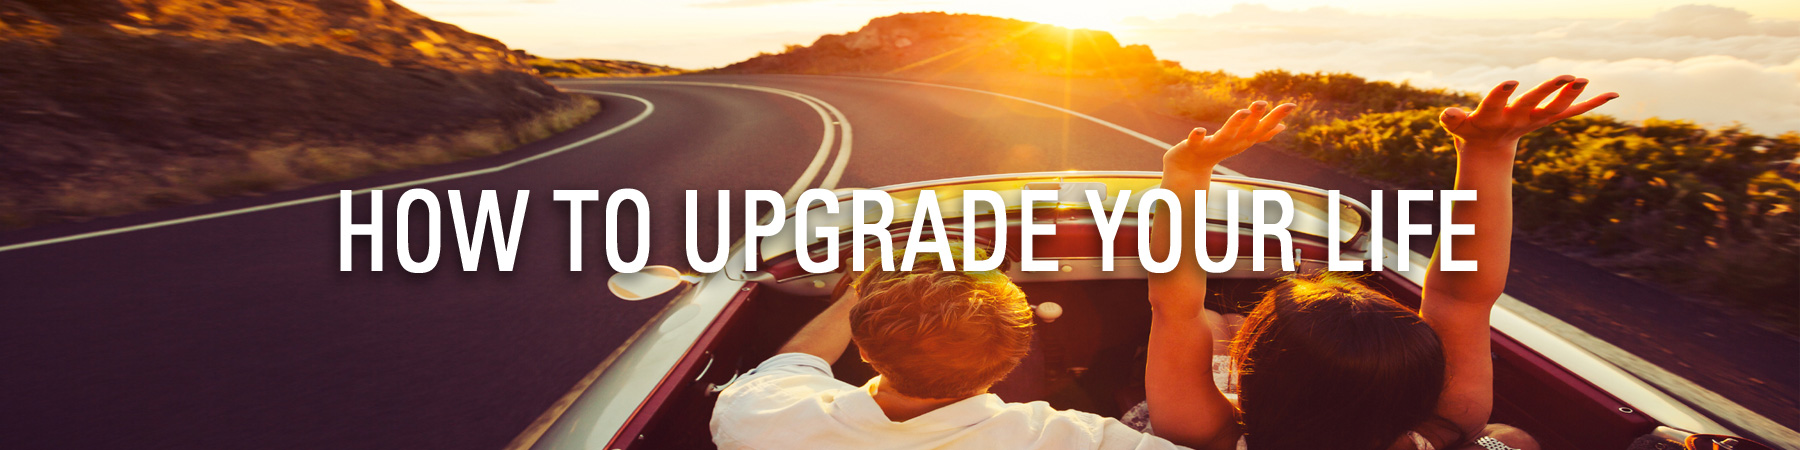 How To Upgrade Your Life